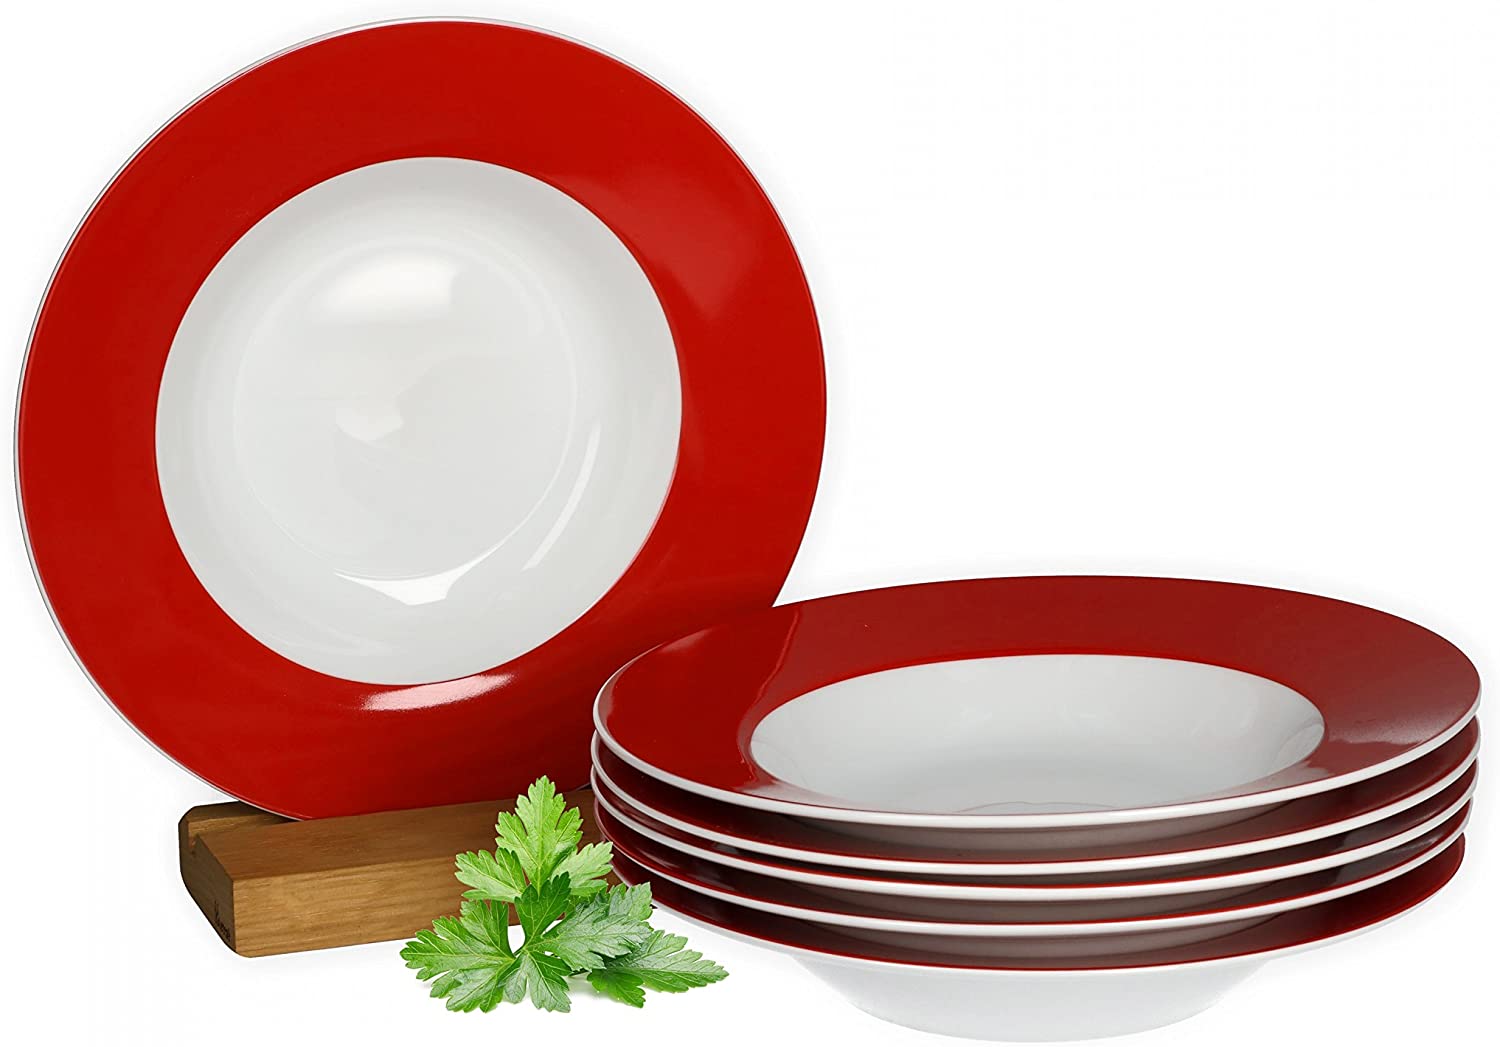 Van Well Vario Soup Plate Set 6 Pieces I Plate Service for 6 People I Deep Pasta Plate 21.5 cm I Porcelain Set White with Red Rim I Salad Plate Microwavable